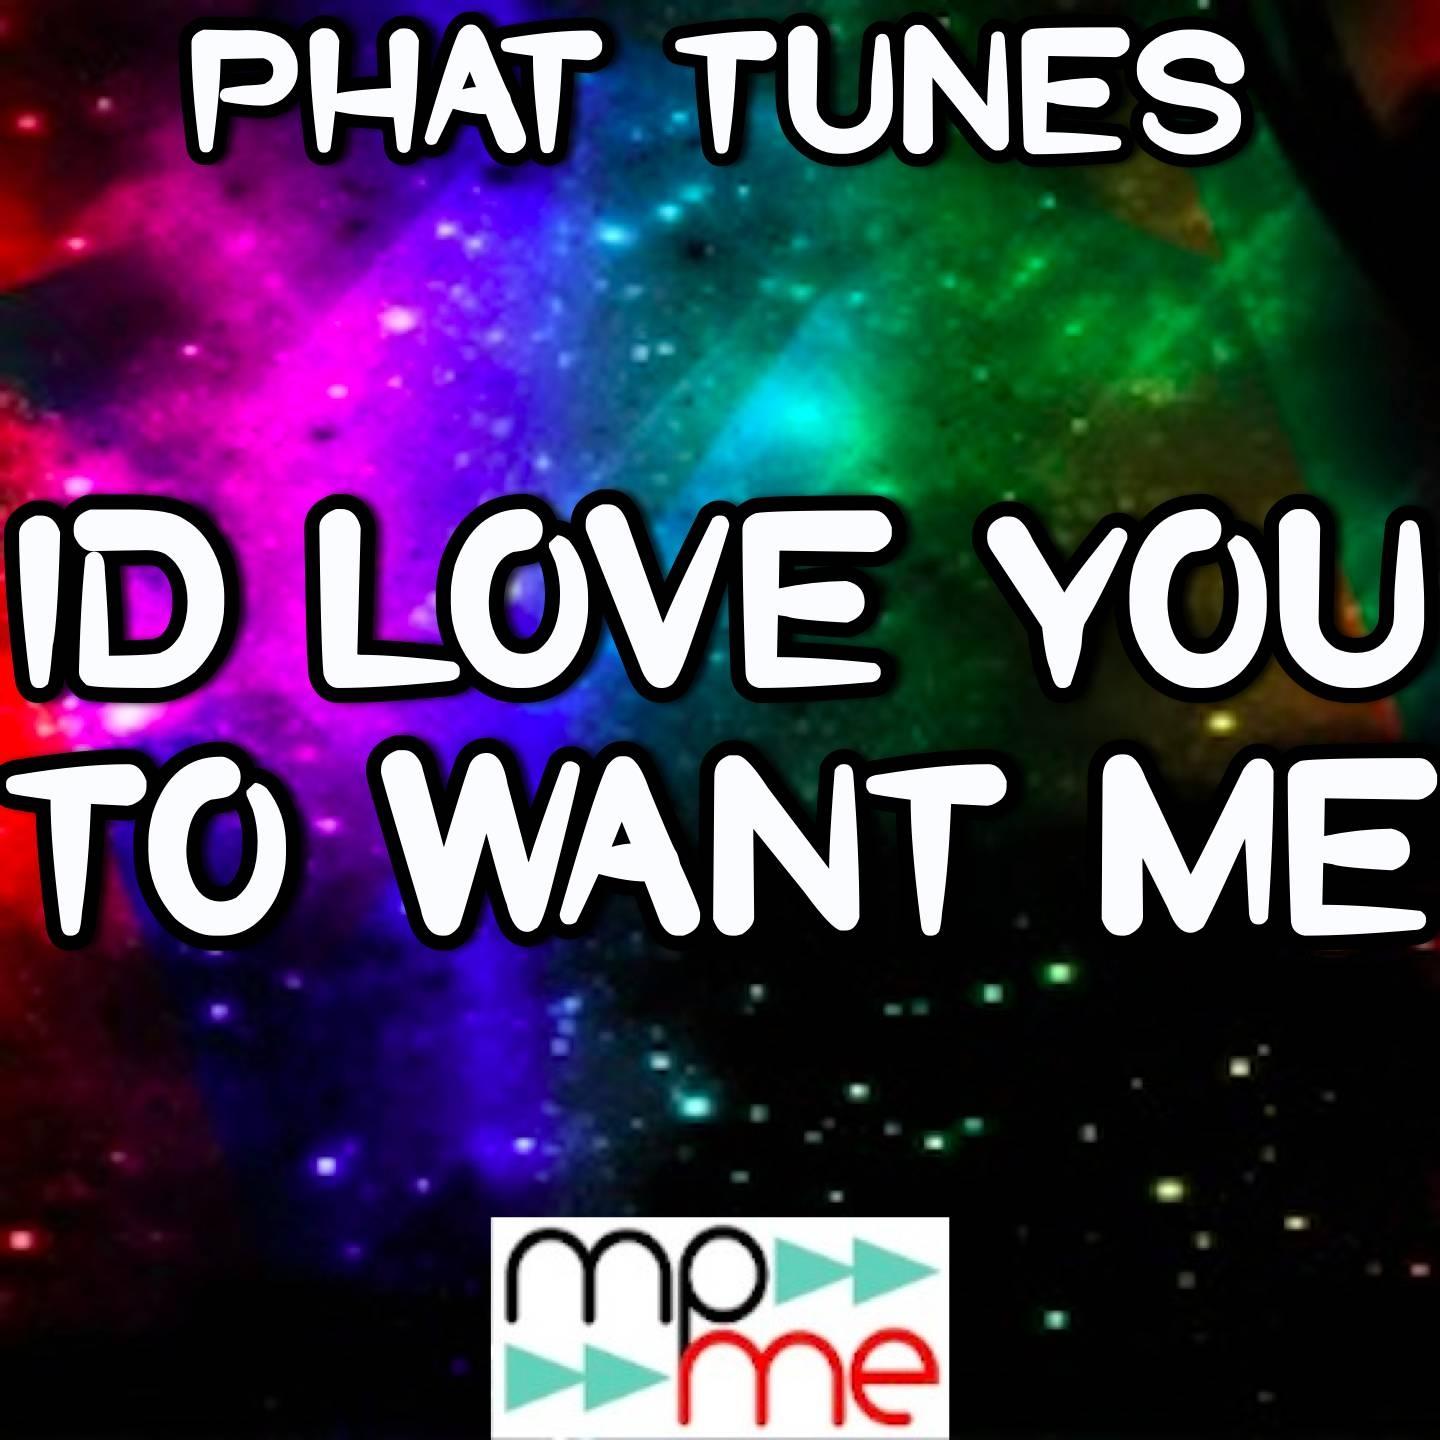 I'd Love You to Want Me (Karaoke Version) (Originally Performed By John Holt)